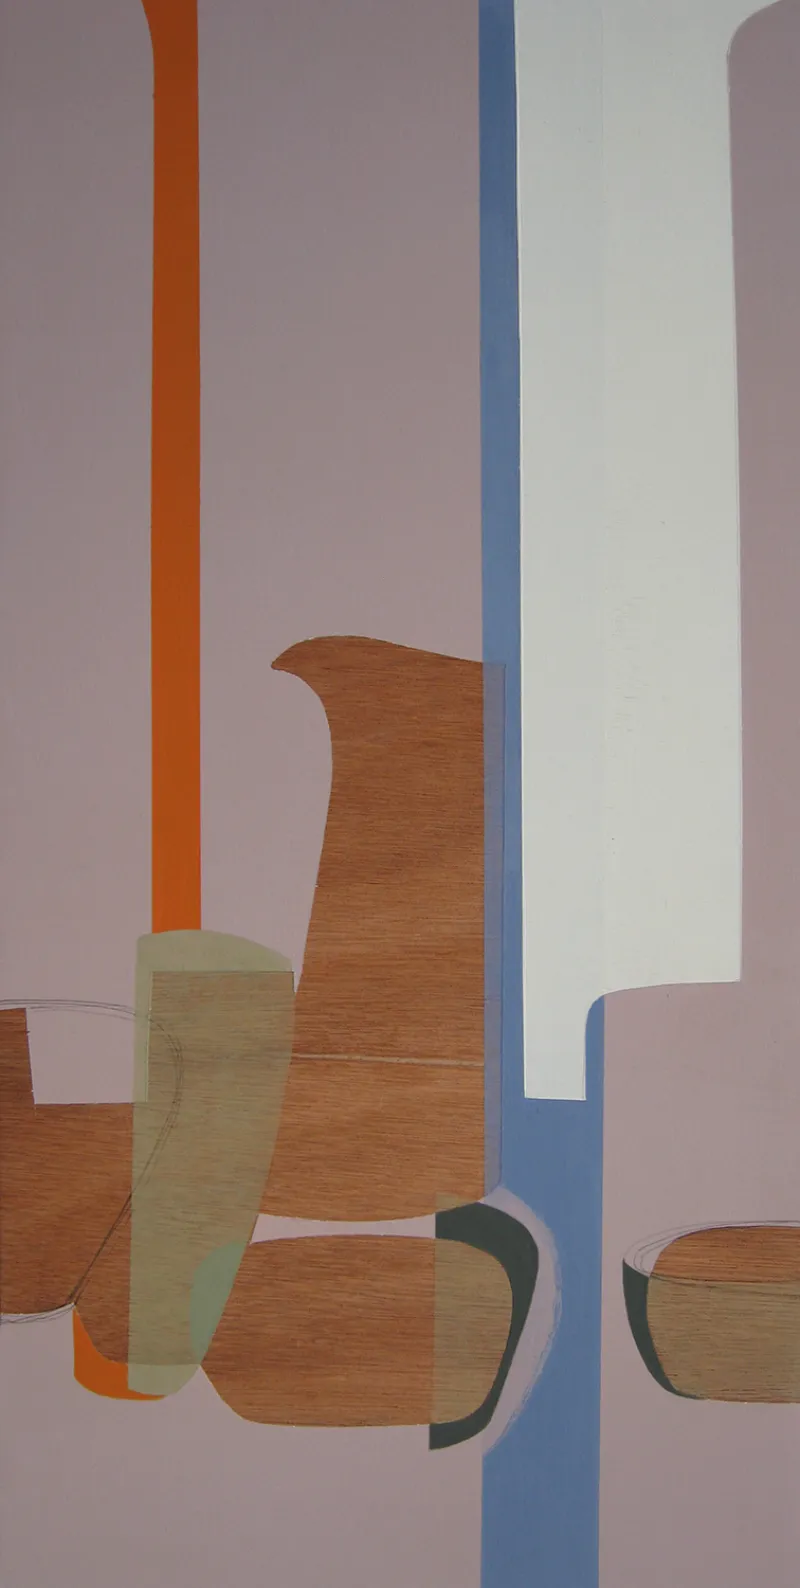 Susan Thomas, "Play 5," Acrylic and pencil on ply, 2009, 300mm x 600mm. SOLD